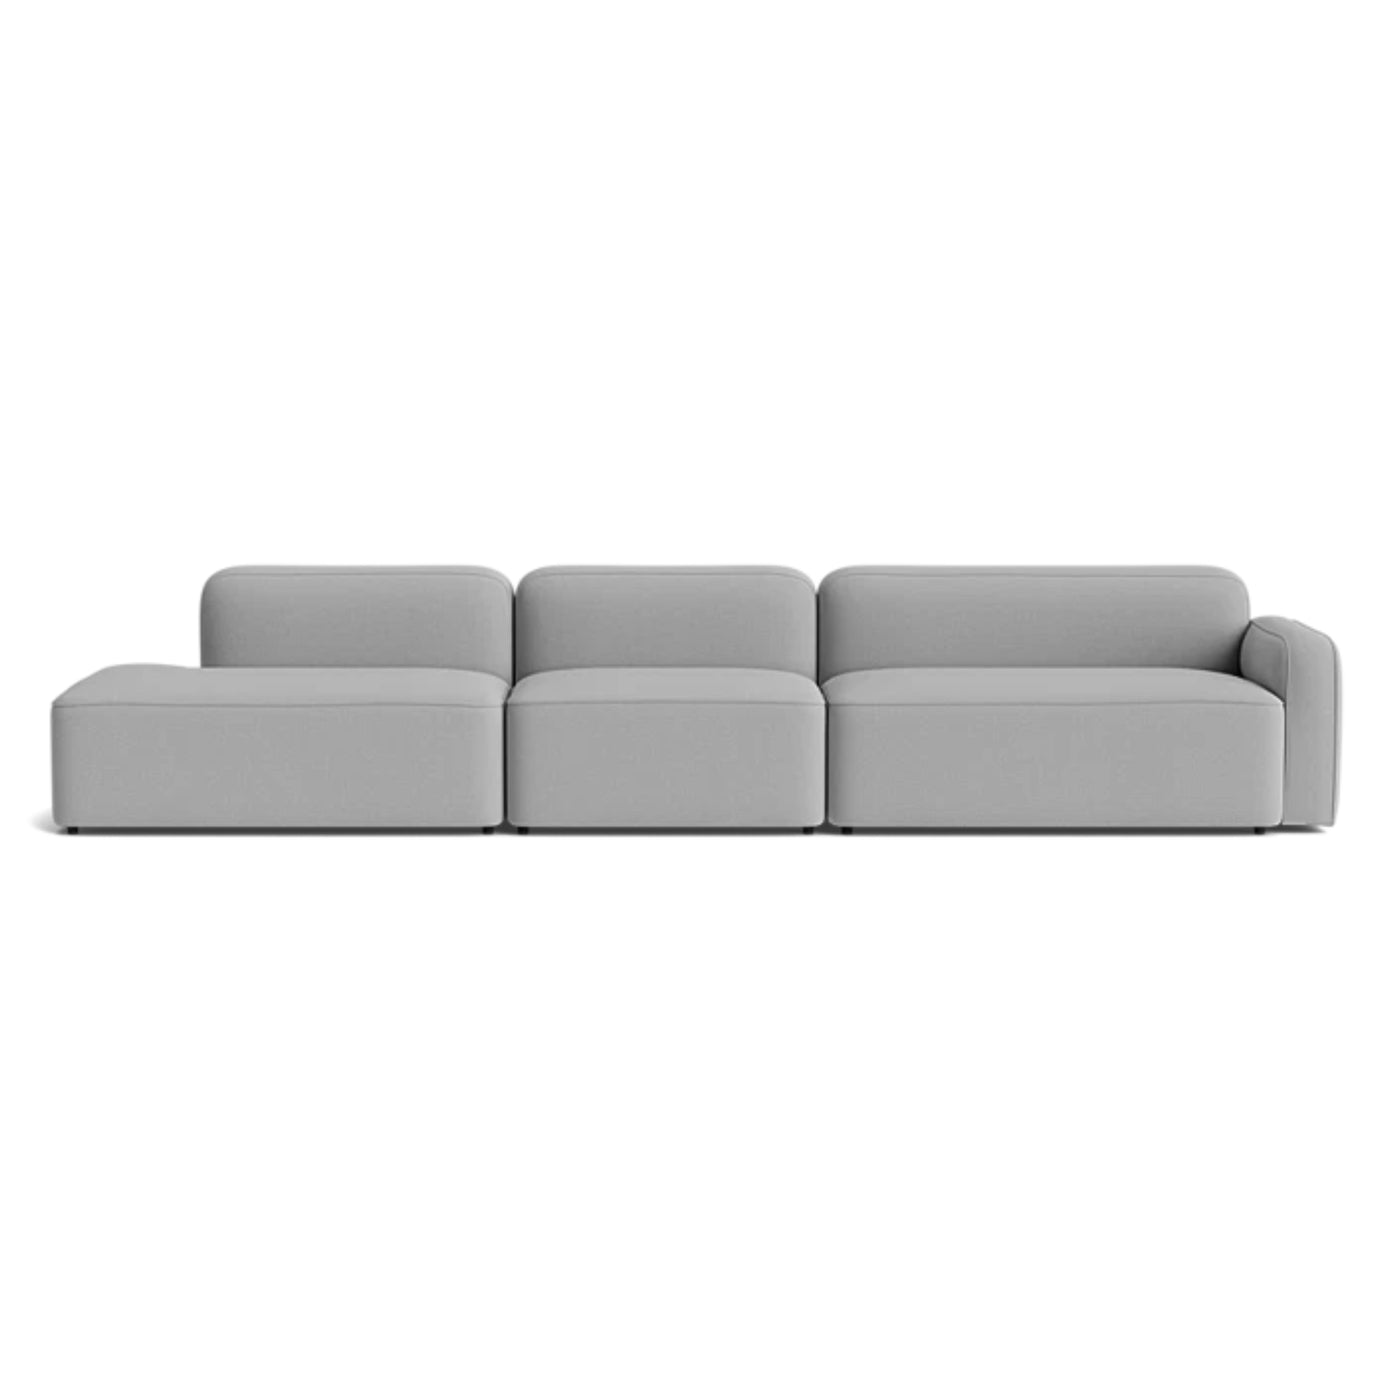 Normann Copenhagen Rope 3 Seater Modular Sofa. Made to order at someday designs. #colour_steelcut-trio-133